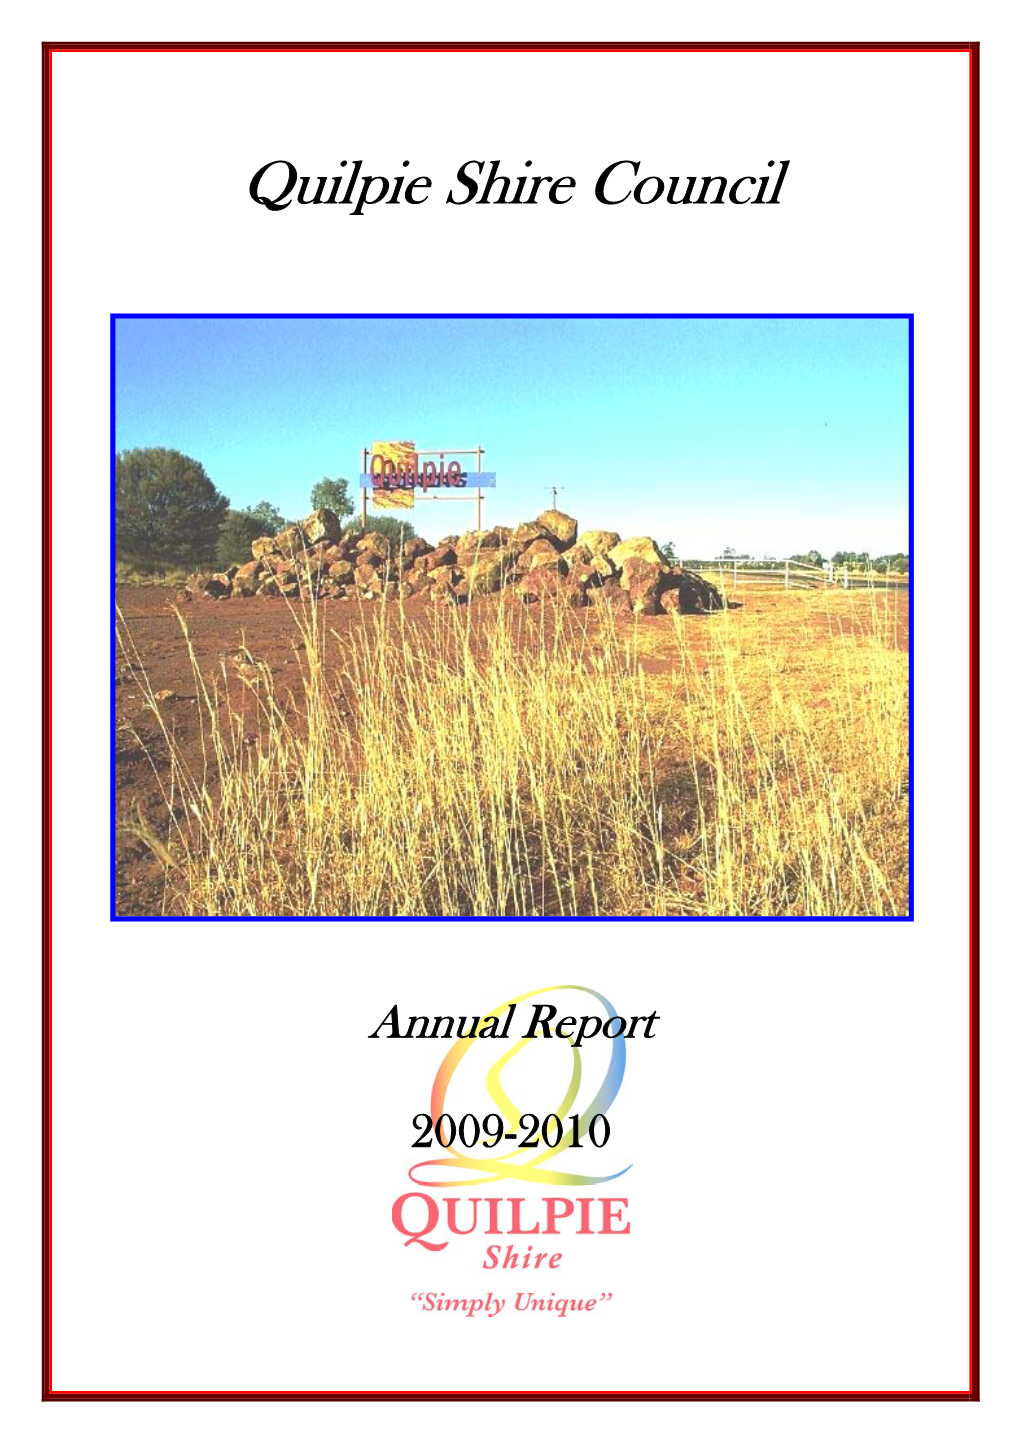 Quilpie Shire Council 2009-2010 Annual Report